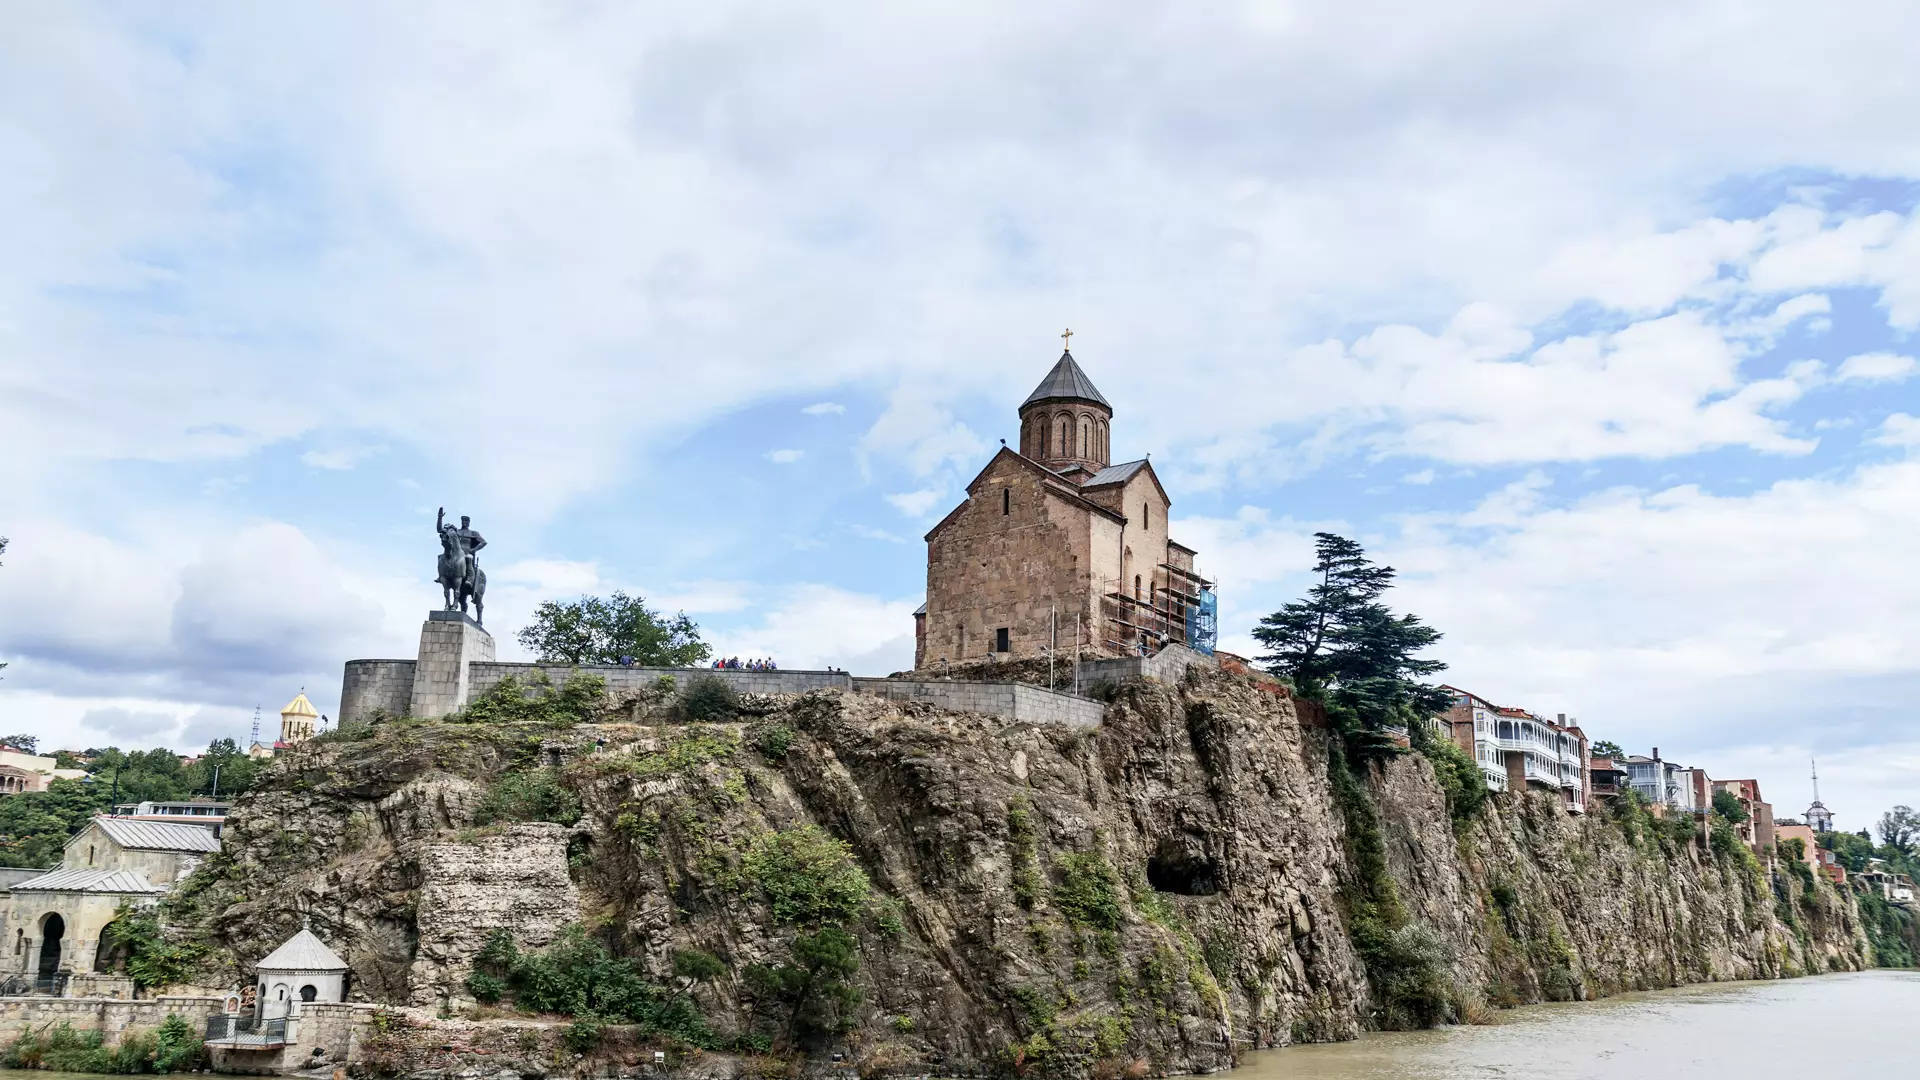 "Metekhi Church, a 13th century Georgian Orthodox Church with a white stone exterior and a distinctive conical dome, located in the historic district of Tbilisi, Georgia."